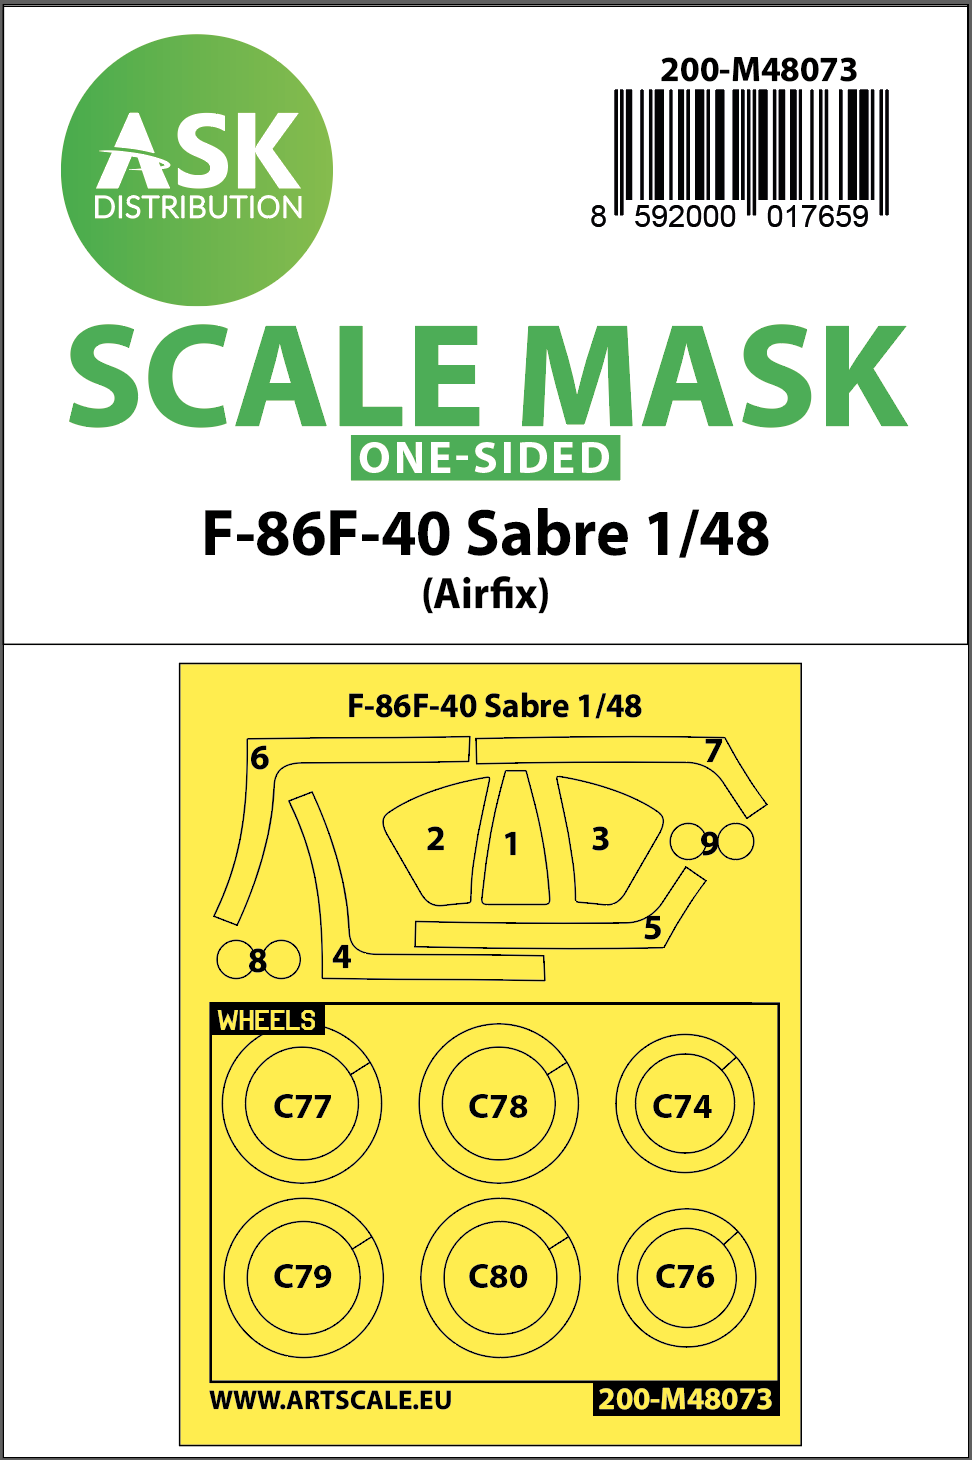 1/48 F-86F-40 Sabre one-sided mask for Airfix 200-M48073